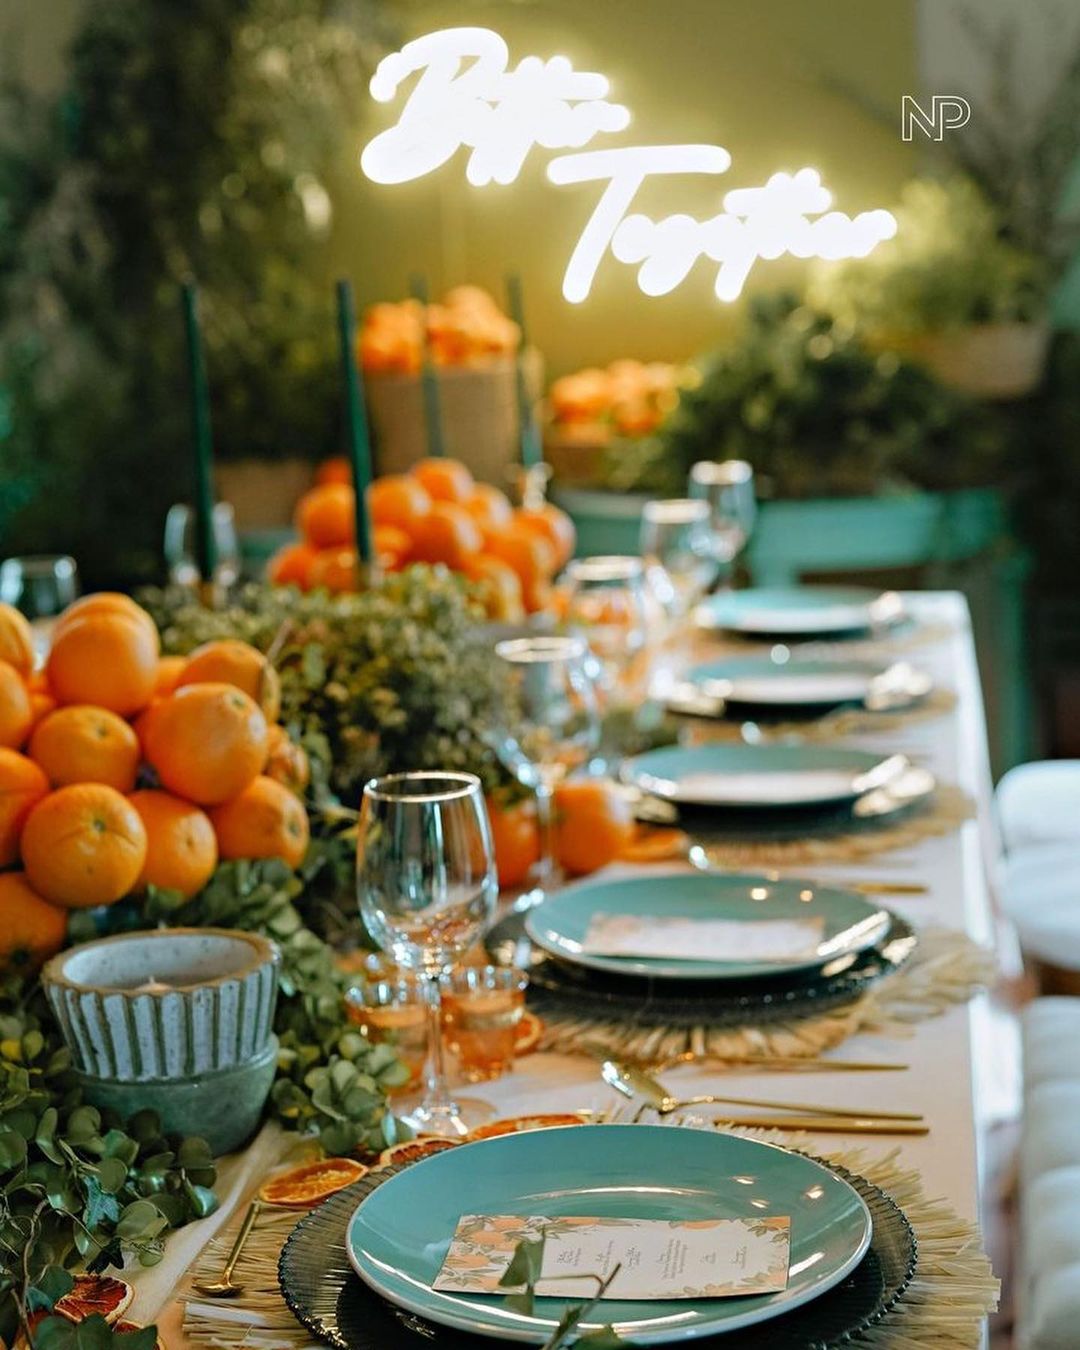 Angel Locsin throws a Thanksgiving dinner for her family - dining table setup